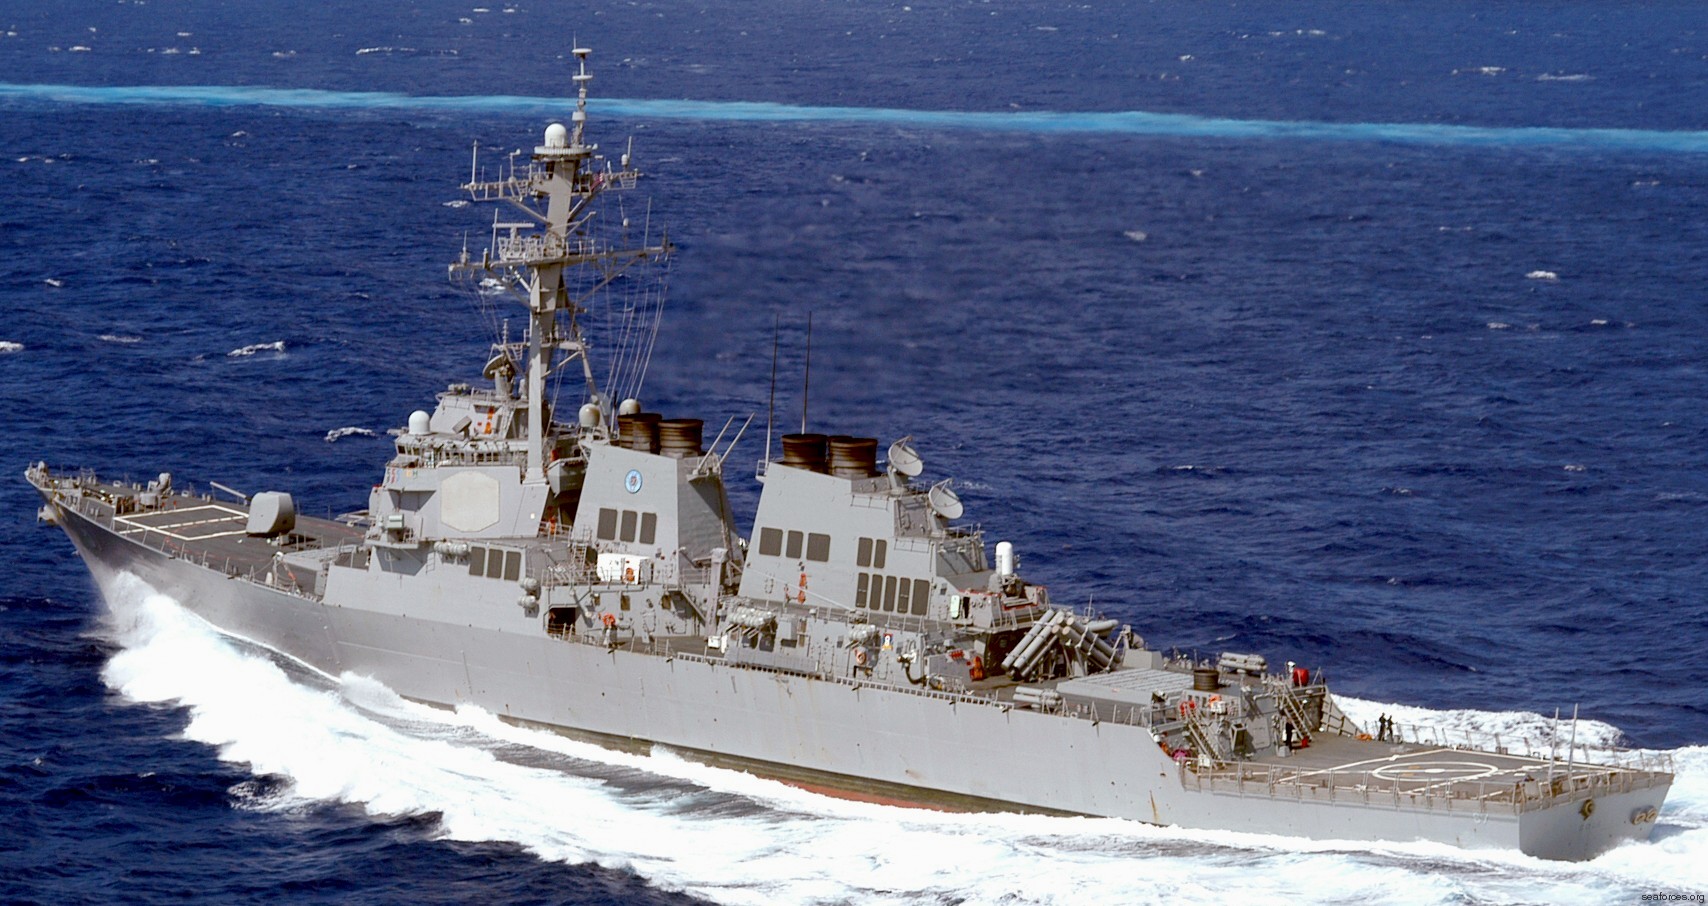 ddg-67 uss cole guided missile destroyer arleigh burke class navy aegis 44x ingalls shipbuilding